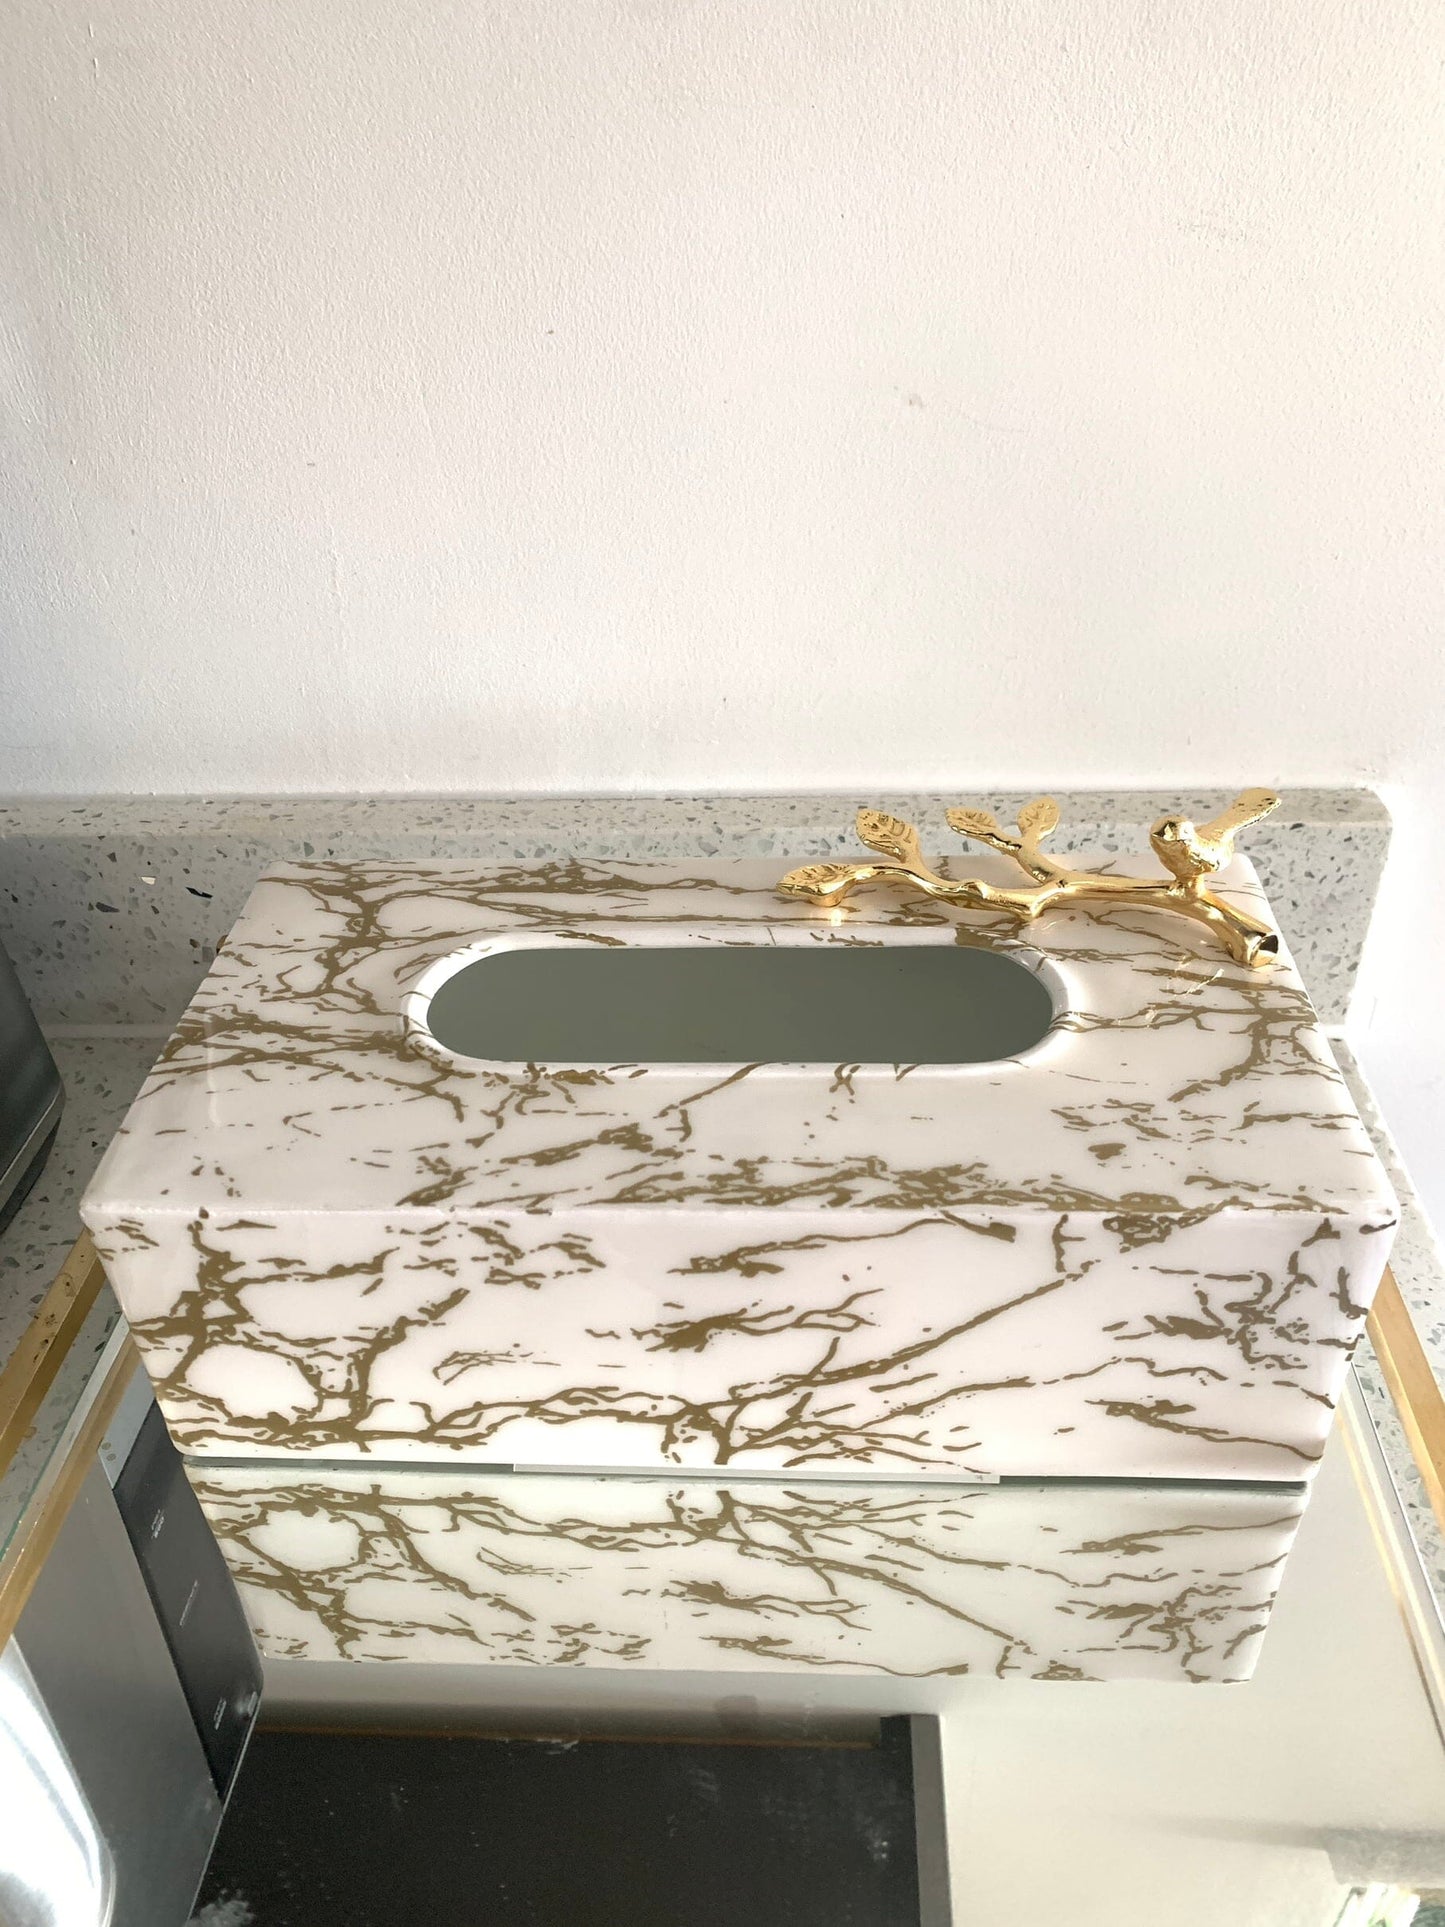 White and Gold Marble Tissue Box with Gold Leaf Design Facial Tissue Holders High Class Touch - Home Decor 